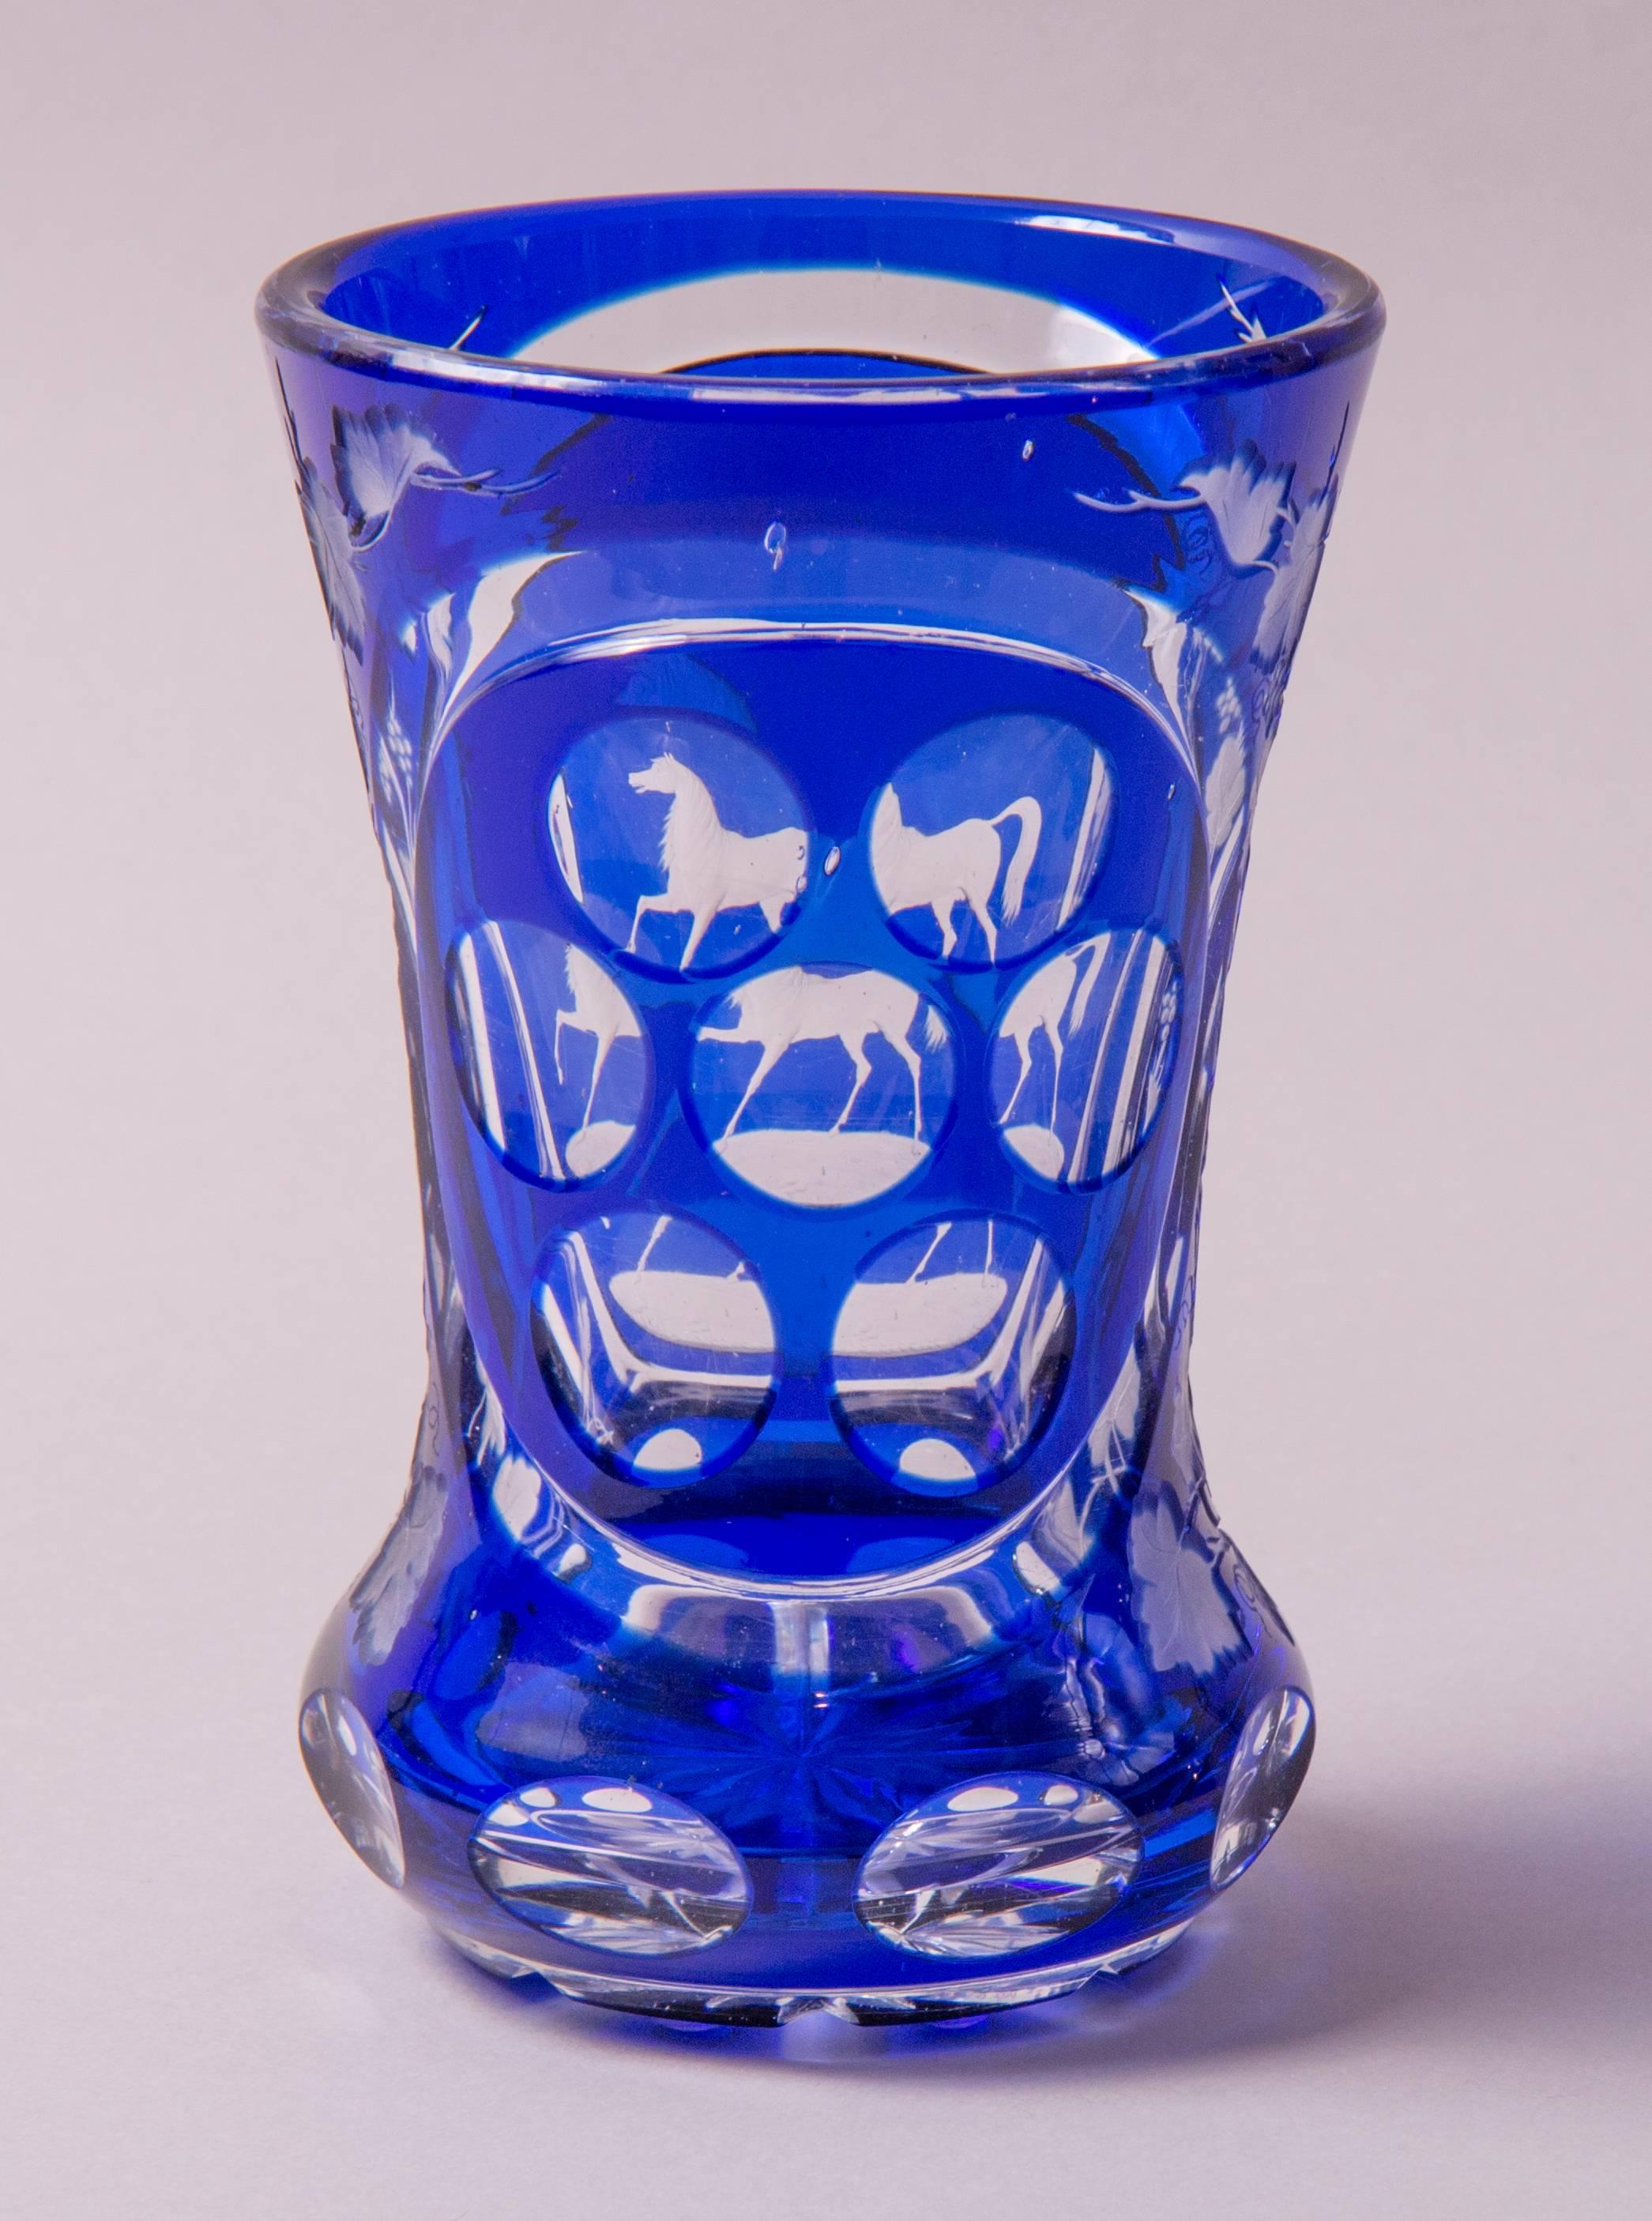 Attributed to Karl Pfohl (1826–1894)
Harrach’sche Hütte Neuwelt, Steinschönau, North Bohemia
Colourless glass with blue overlay, the facing side with cut image of a horse and on the sides of vine branches, the reverse side with seven cut